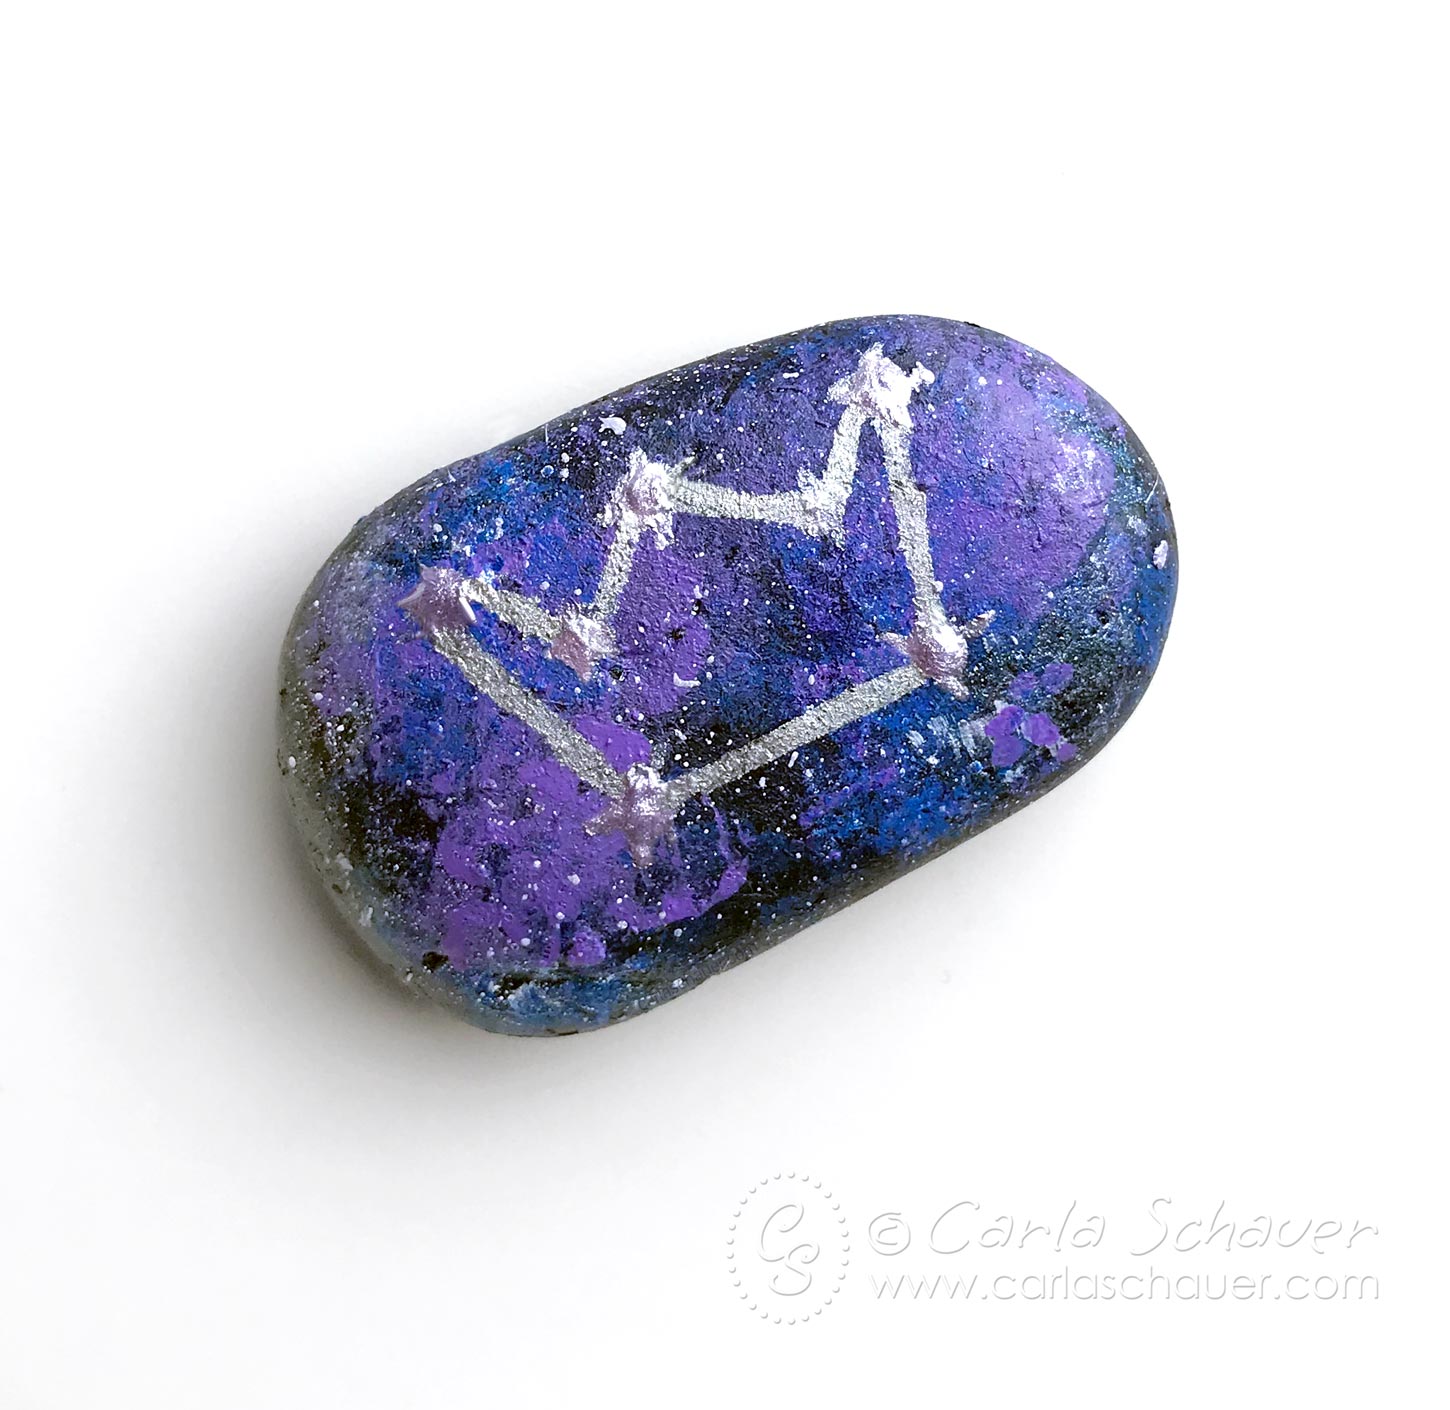 Rock painted with galaxy on white background.